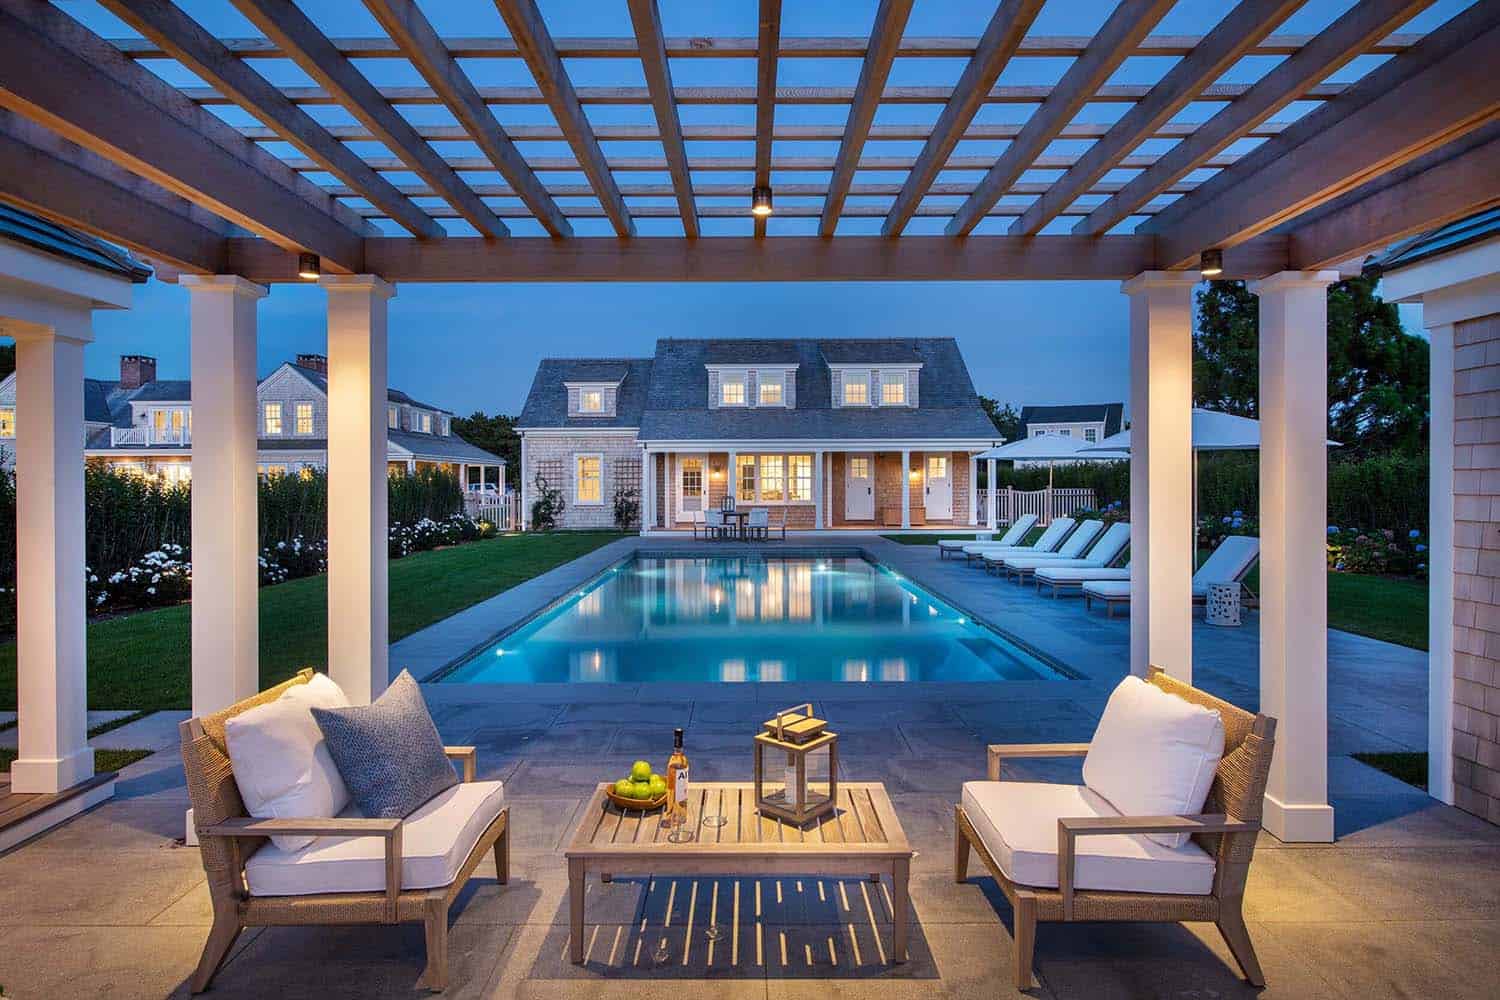 coastal style trellis and outdoor furniture with a view of the swimming pool at dusk